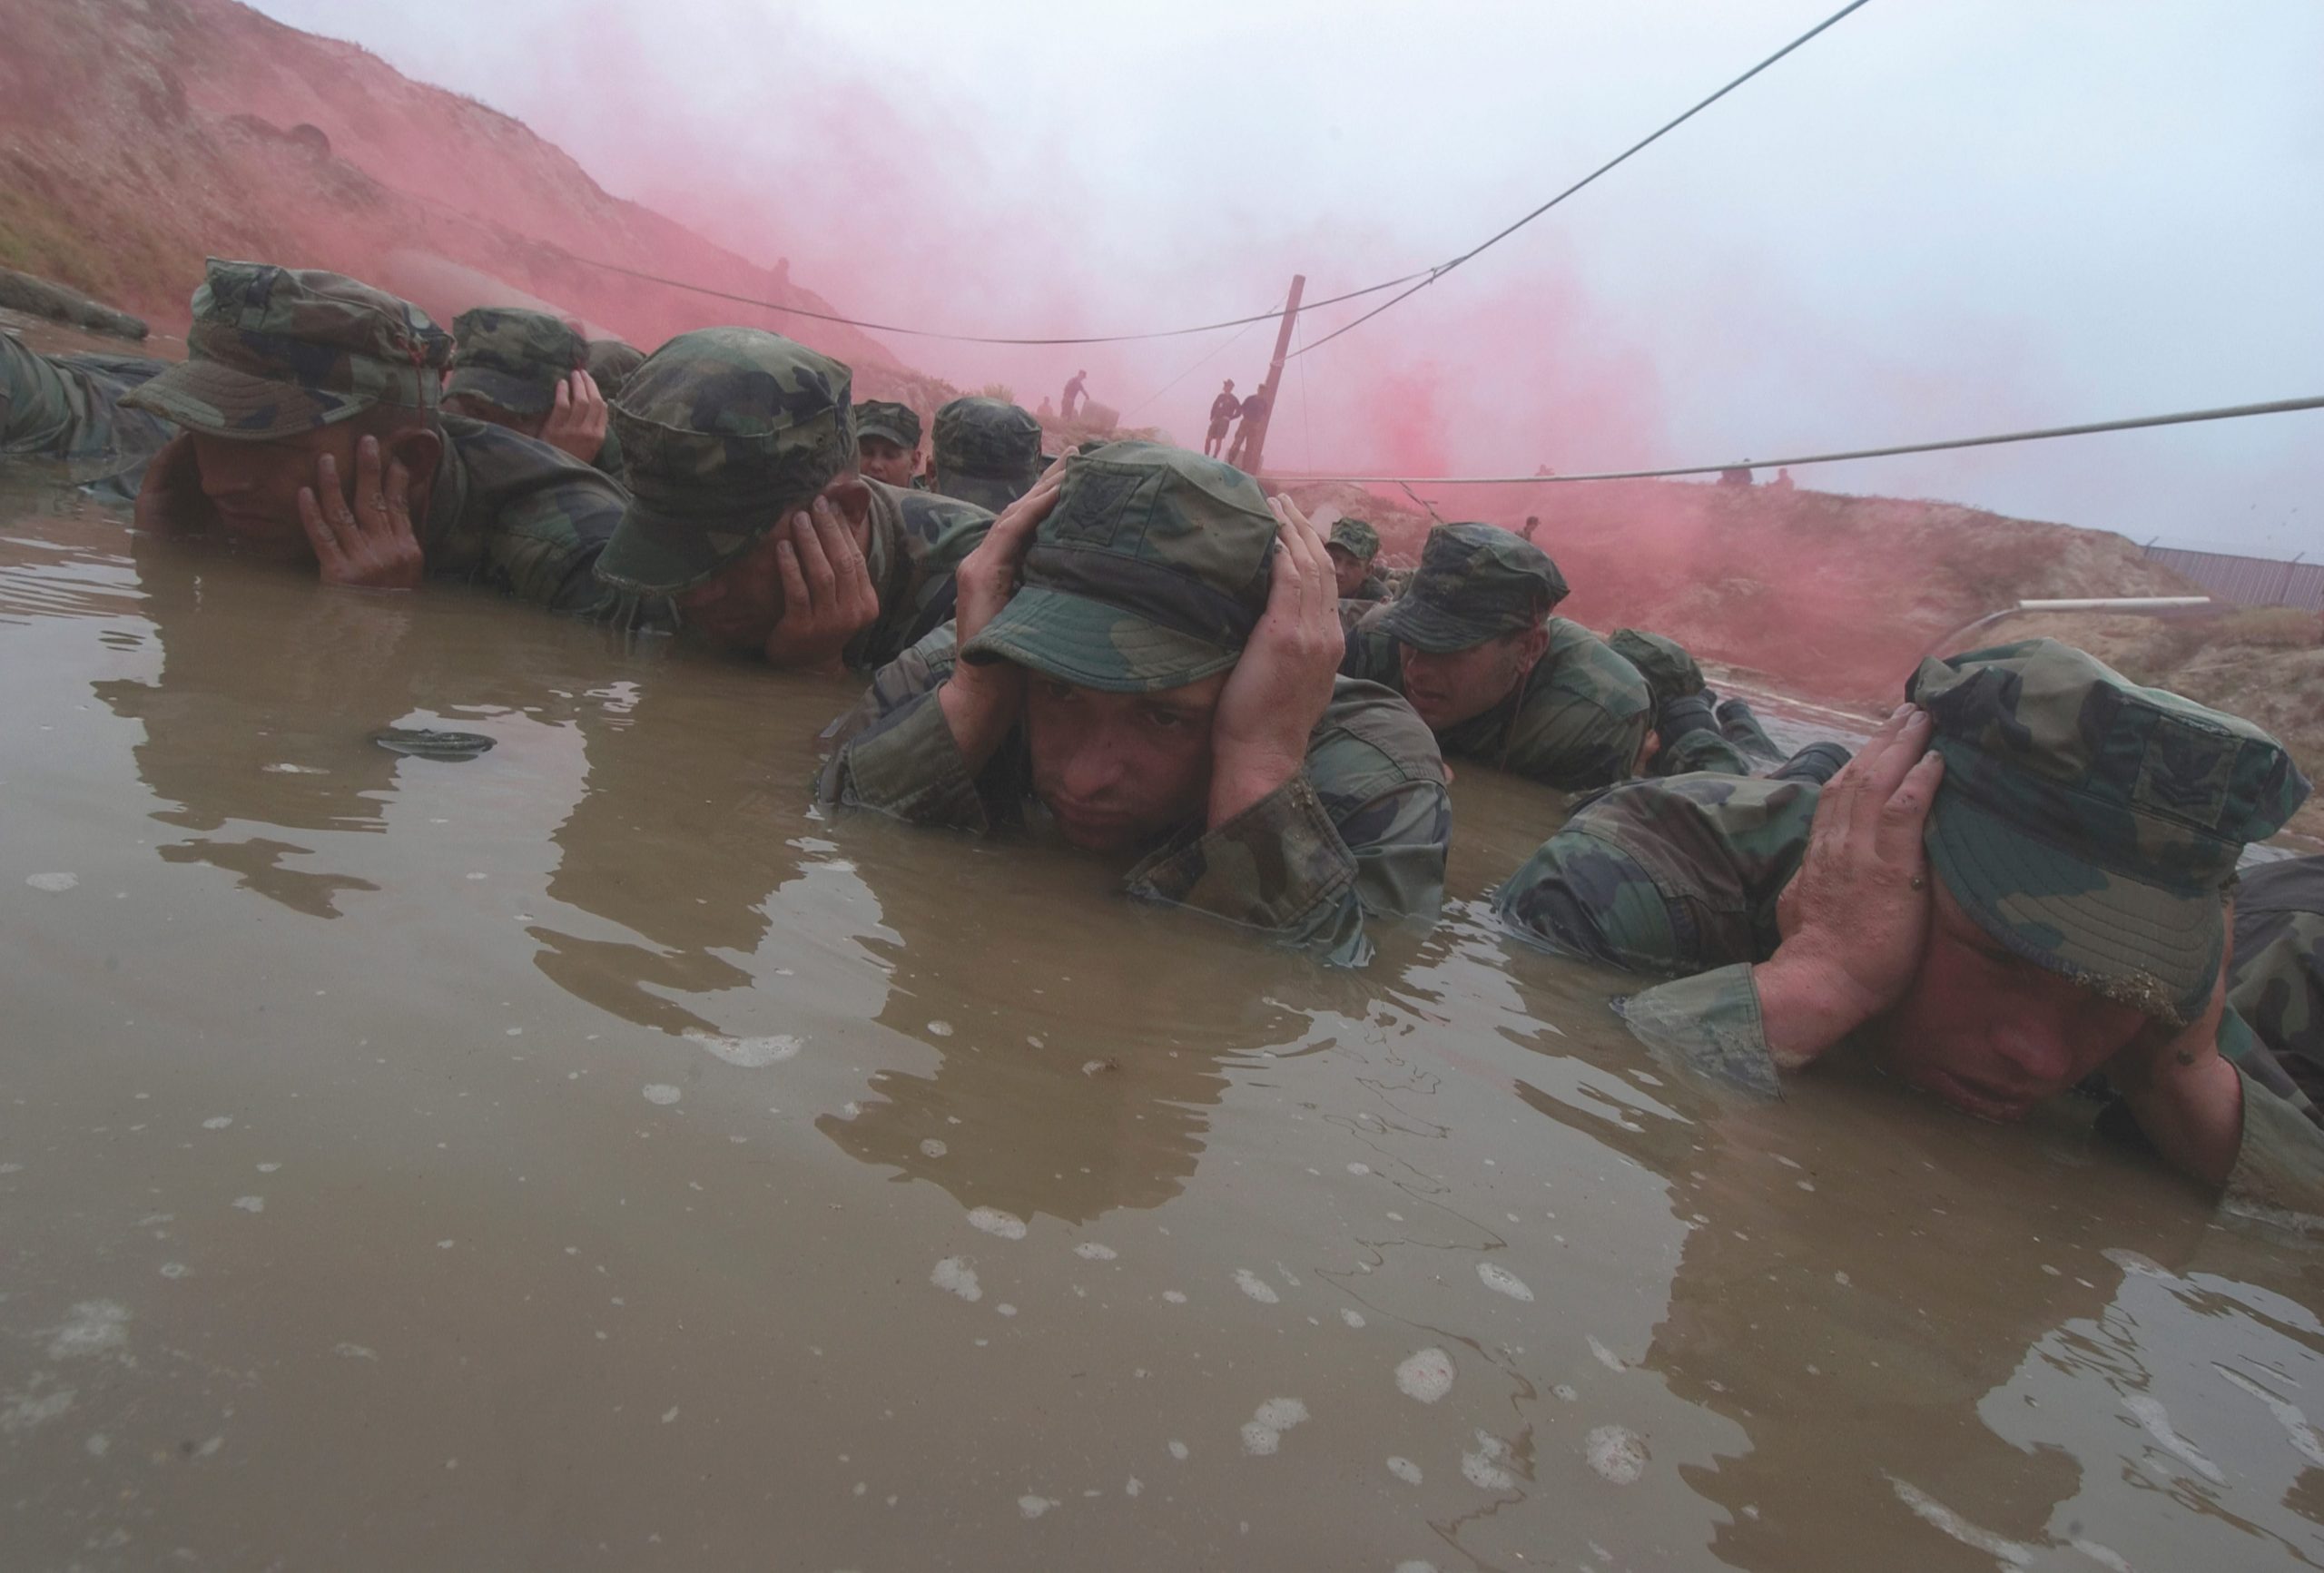 Navy SEAL candidates participate in an exercise during "Hell Week."